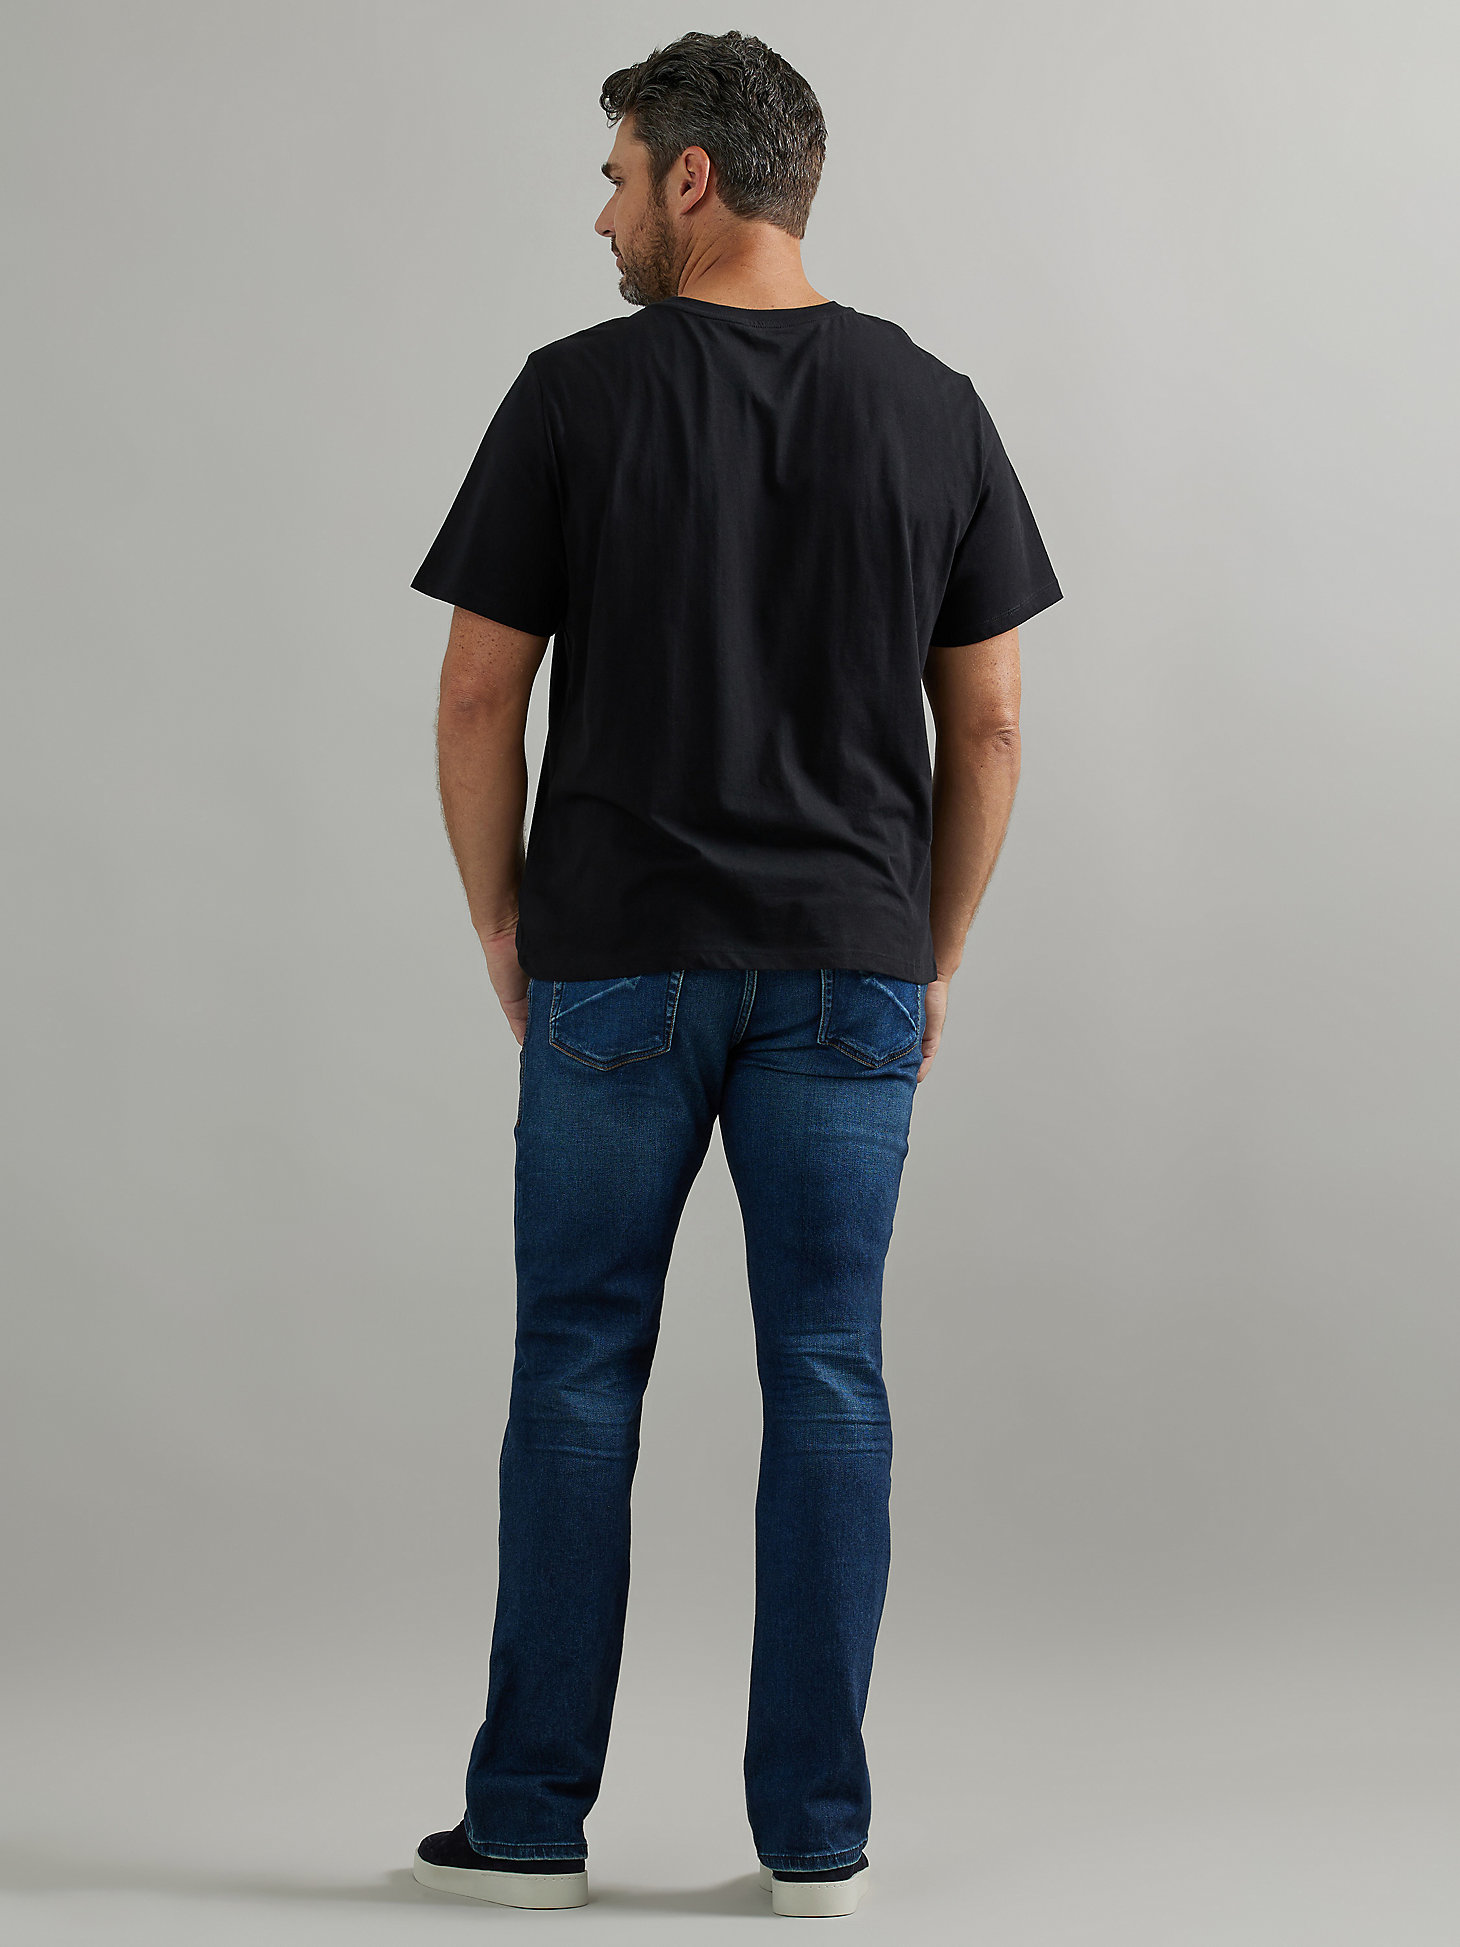 Men's Henlee Bootcut Jean in Hall of Fame alternative view 6